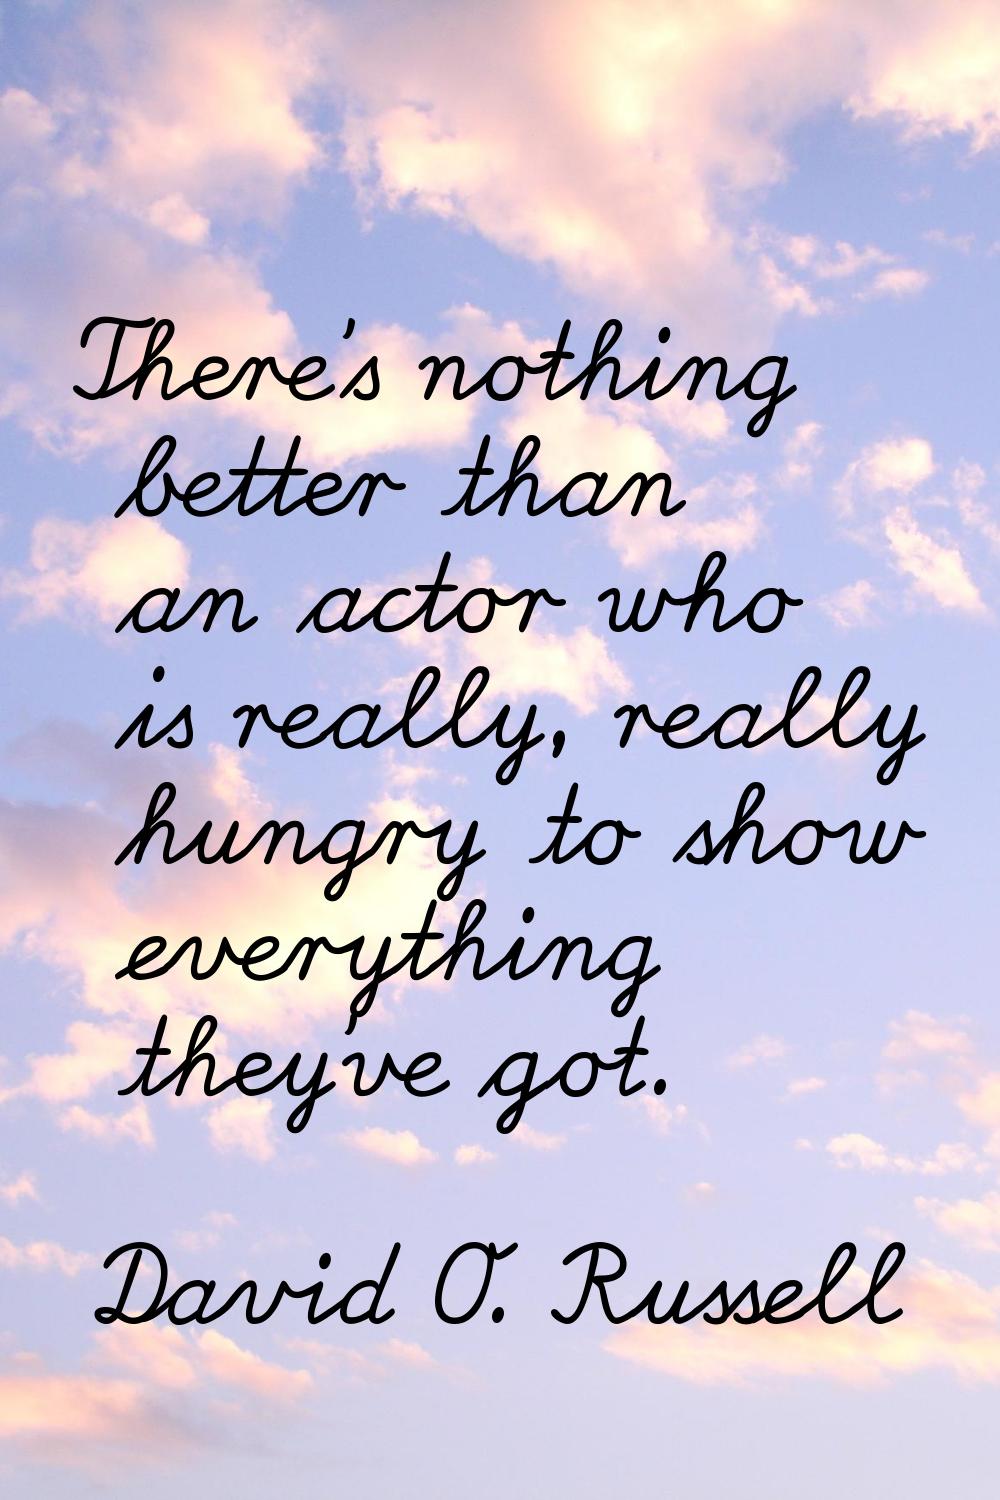 There's nothing better than an actor who is really, really hungry to show everything they've got.